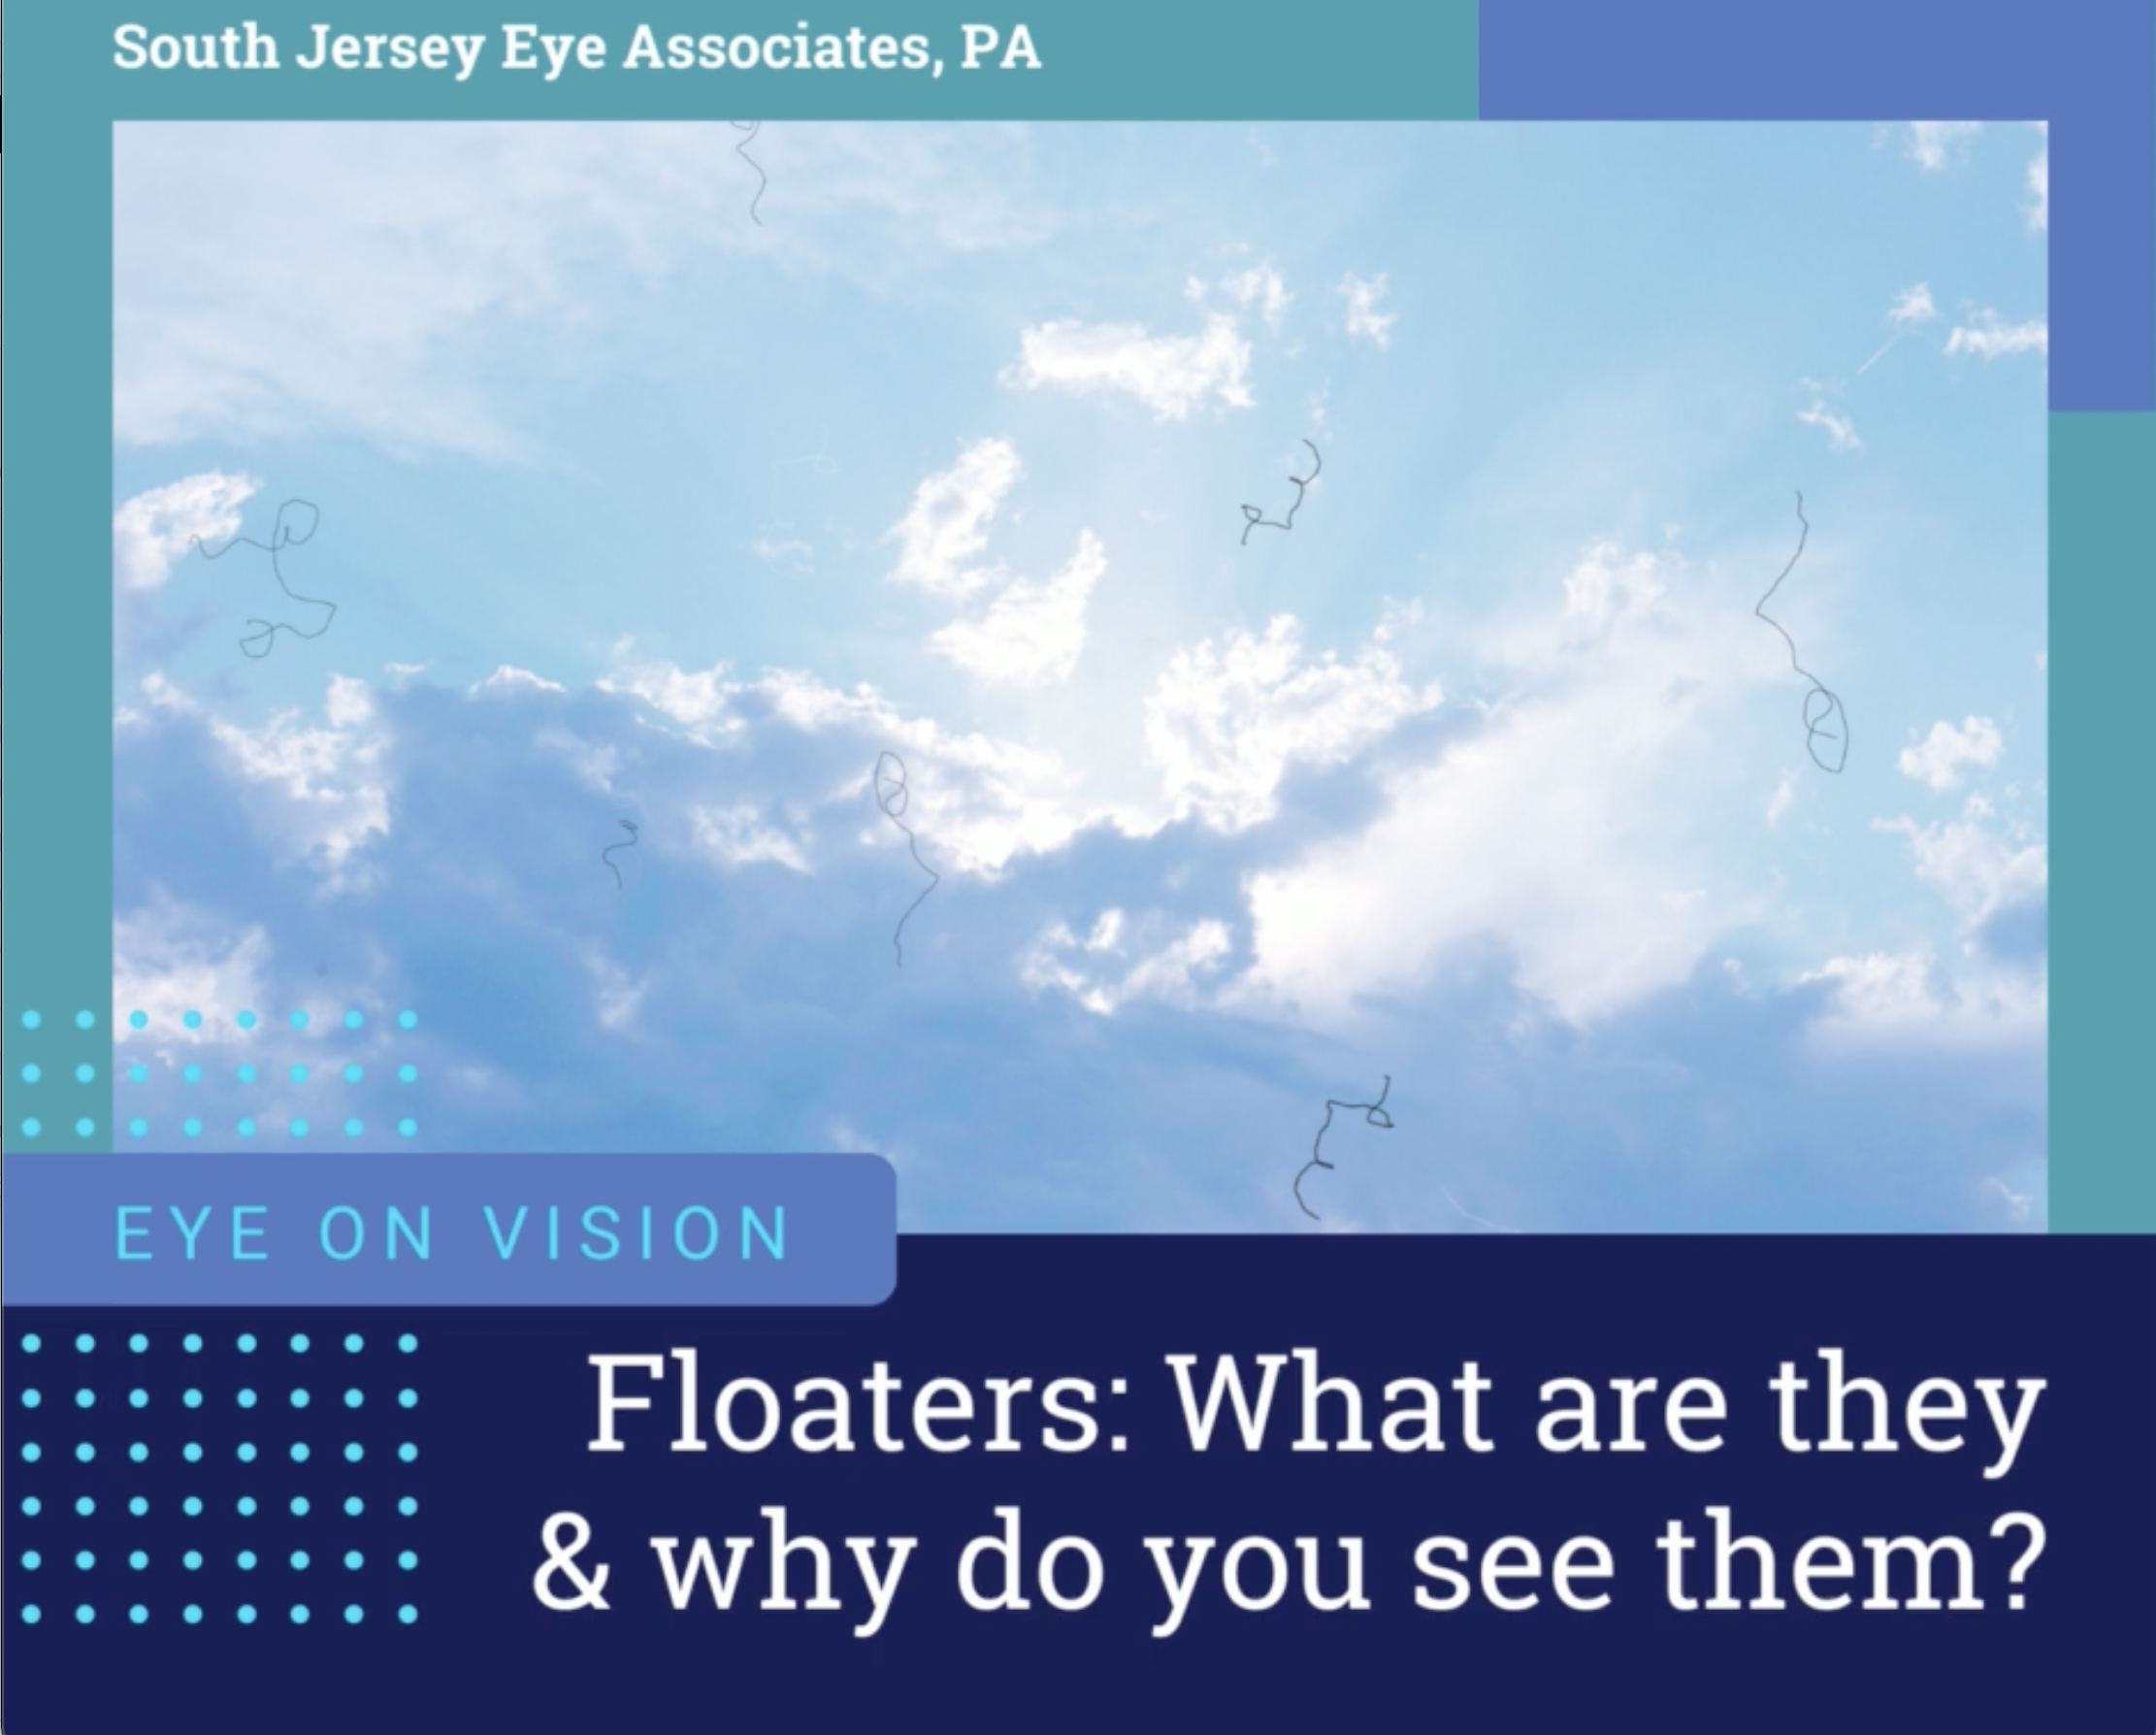 Floaters: What are they and why do you see them?